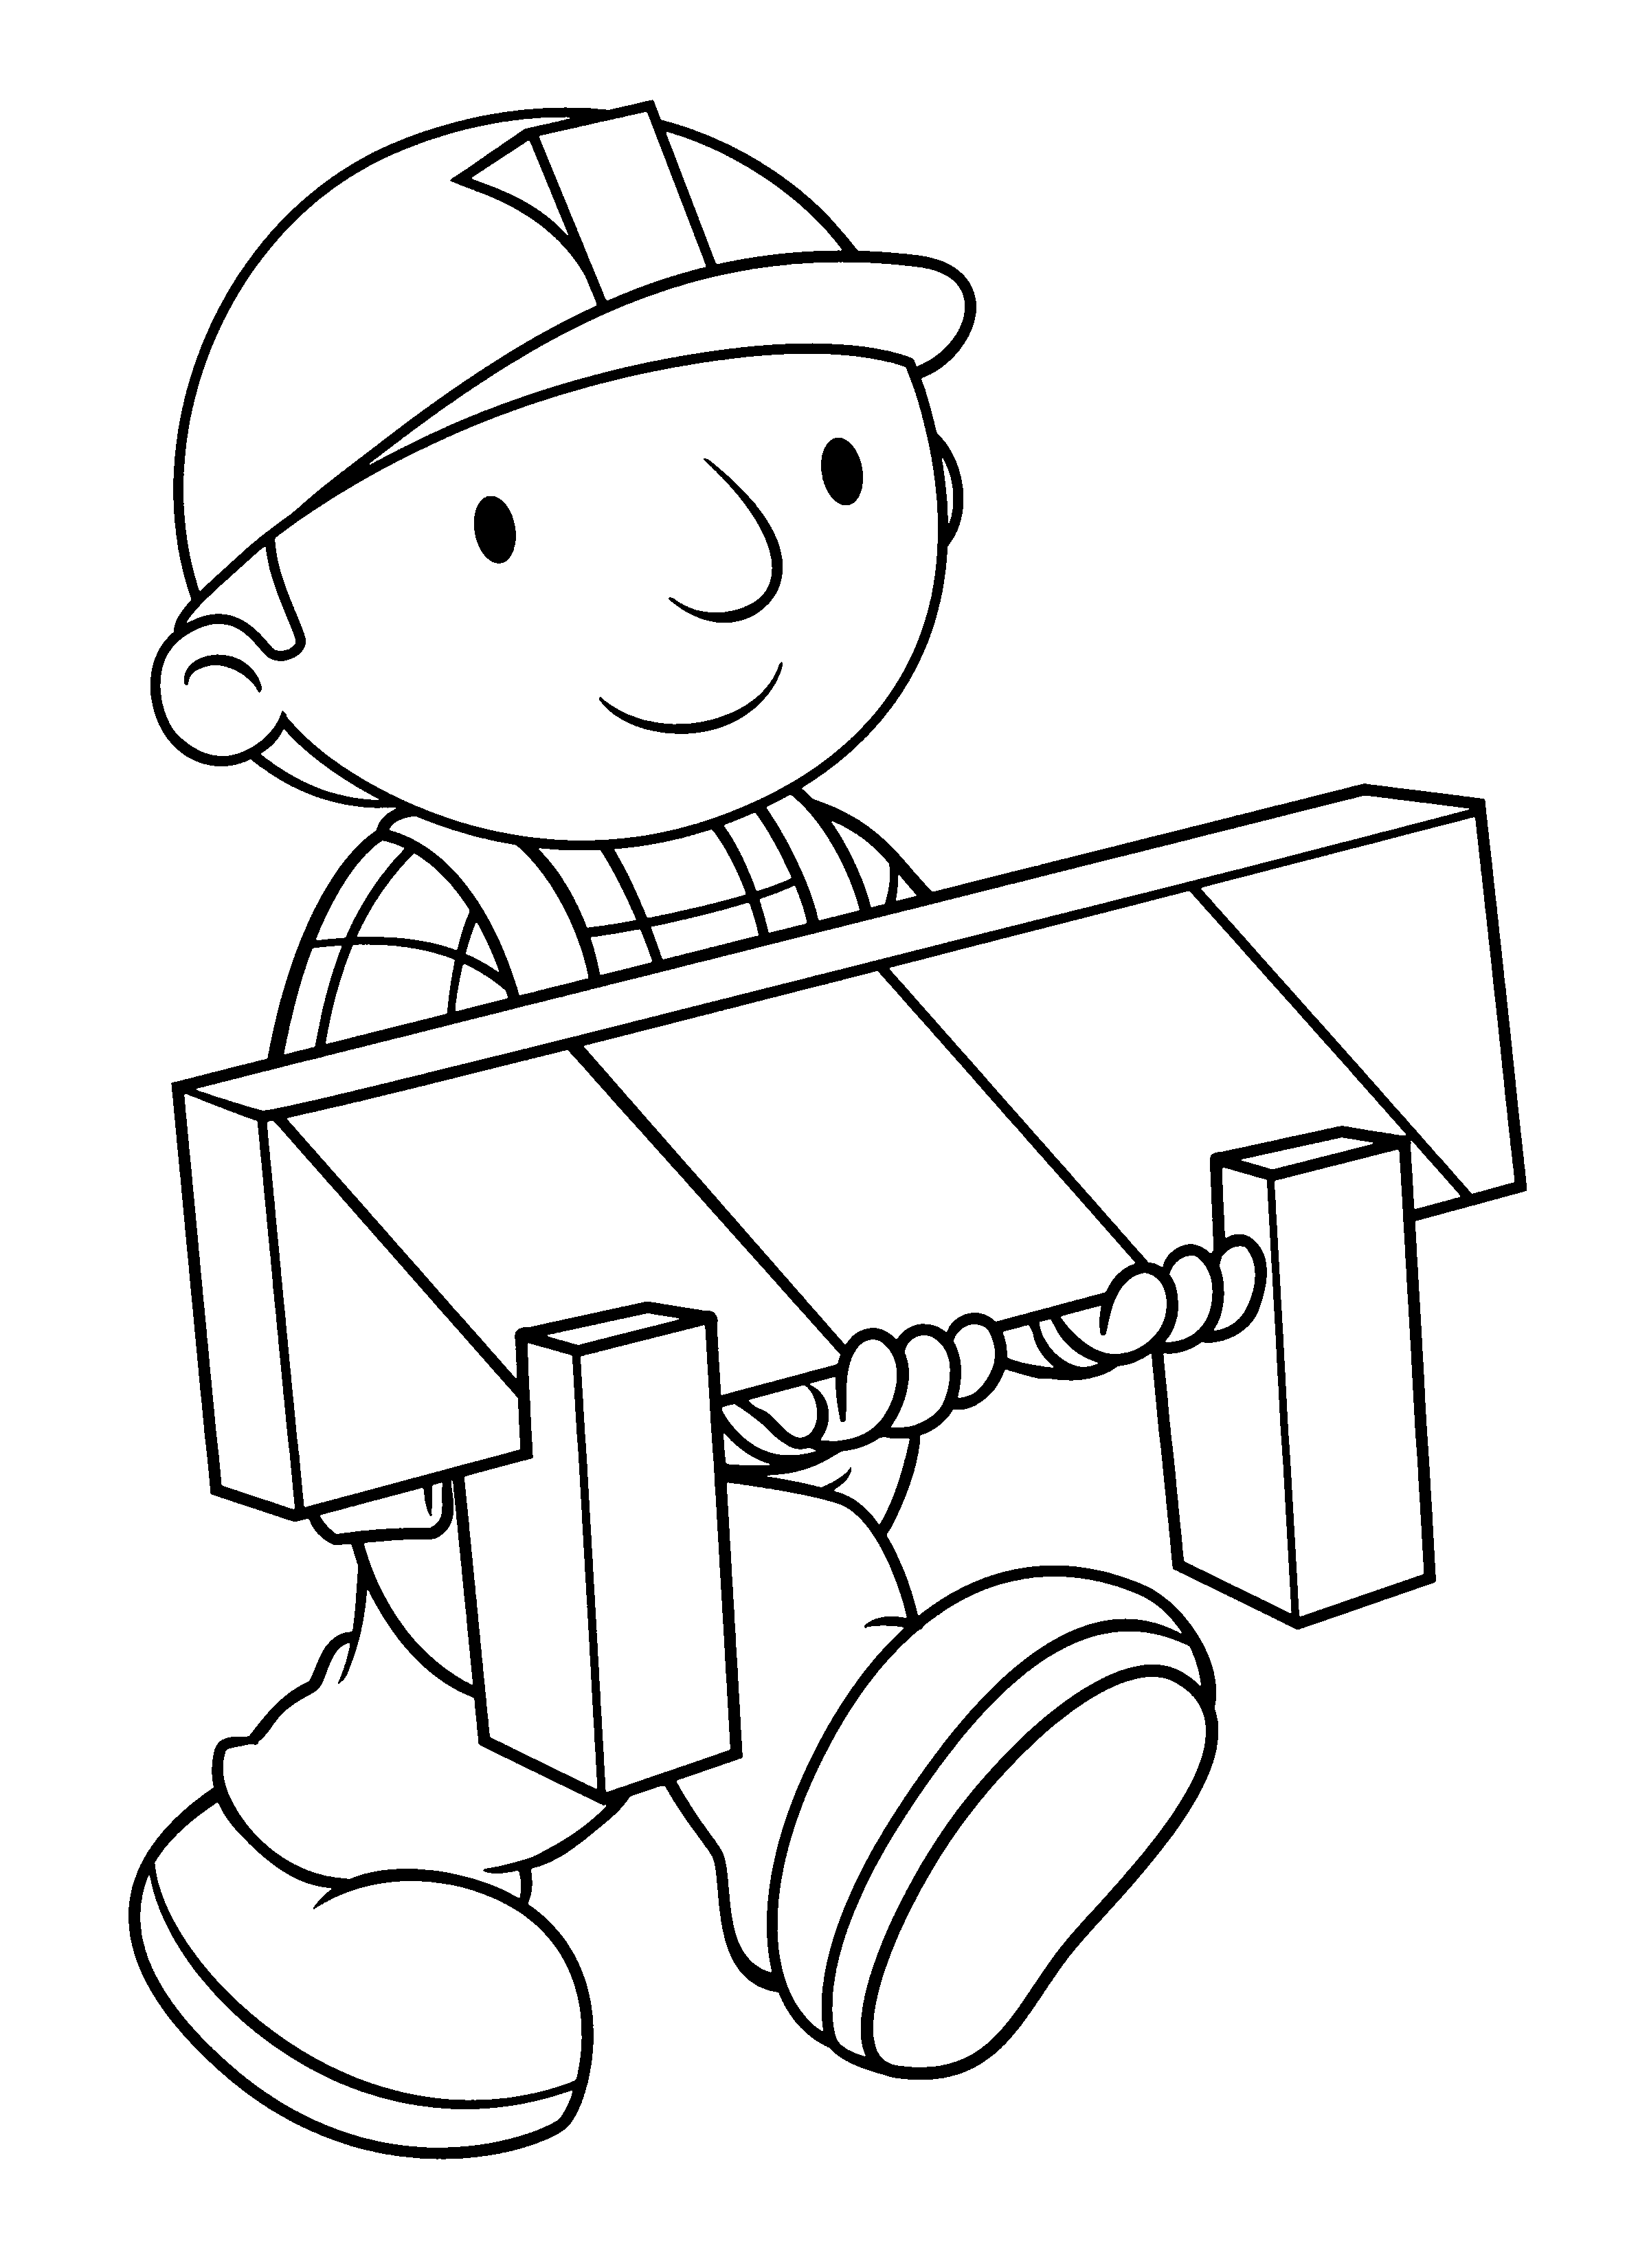 images of coloring pages - photo #29